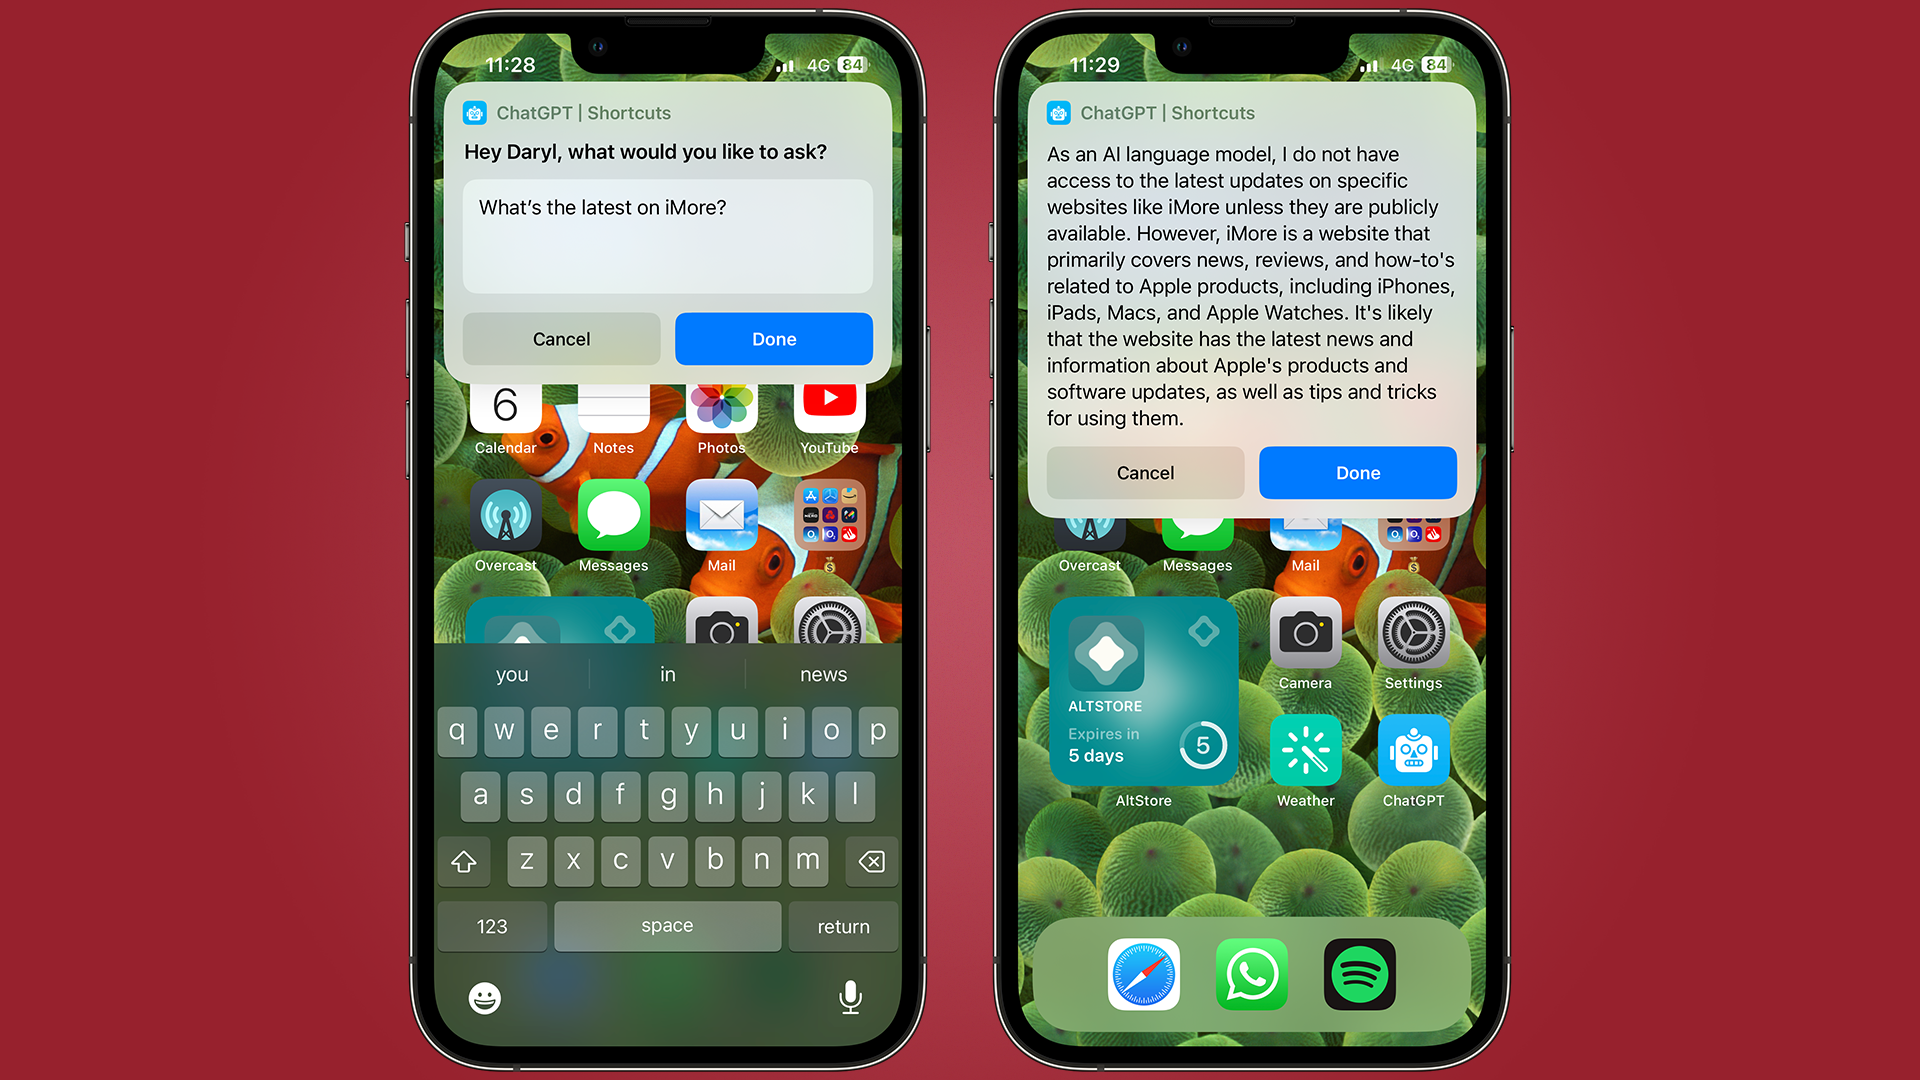 How to Use ChatGPT with Siri on iPhone (2023 Guide)